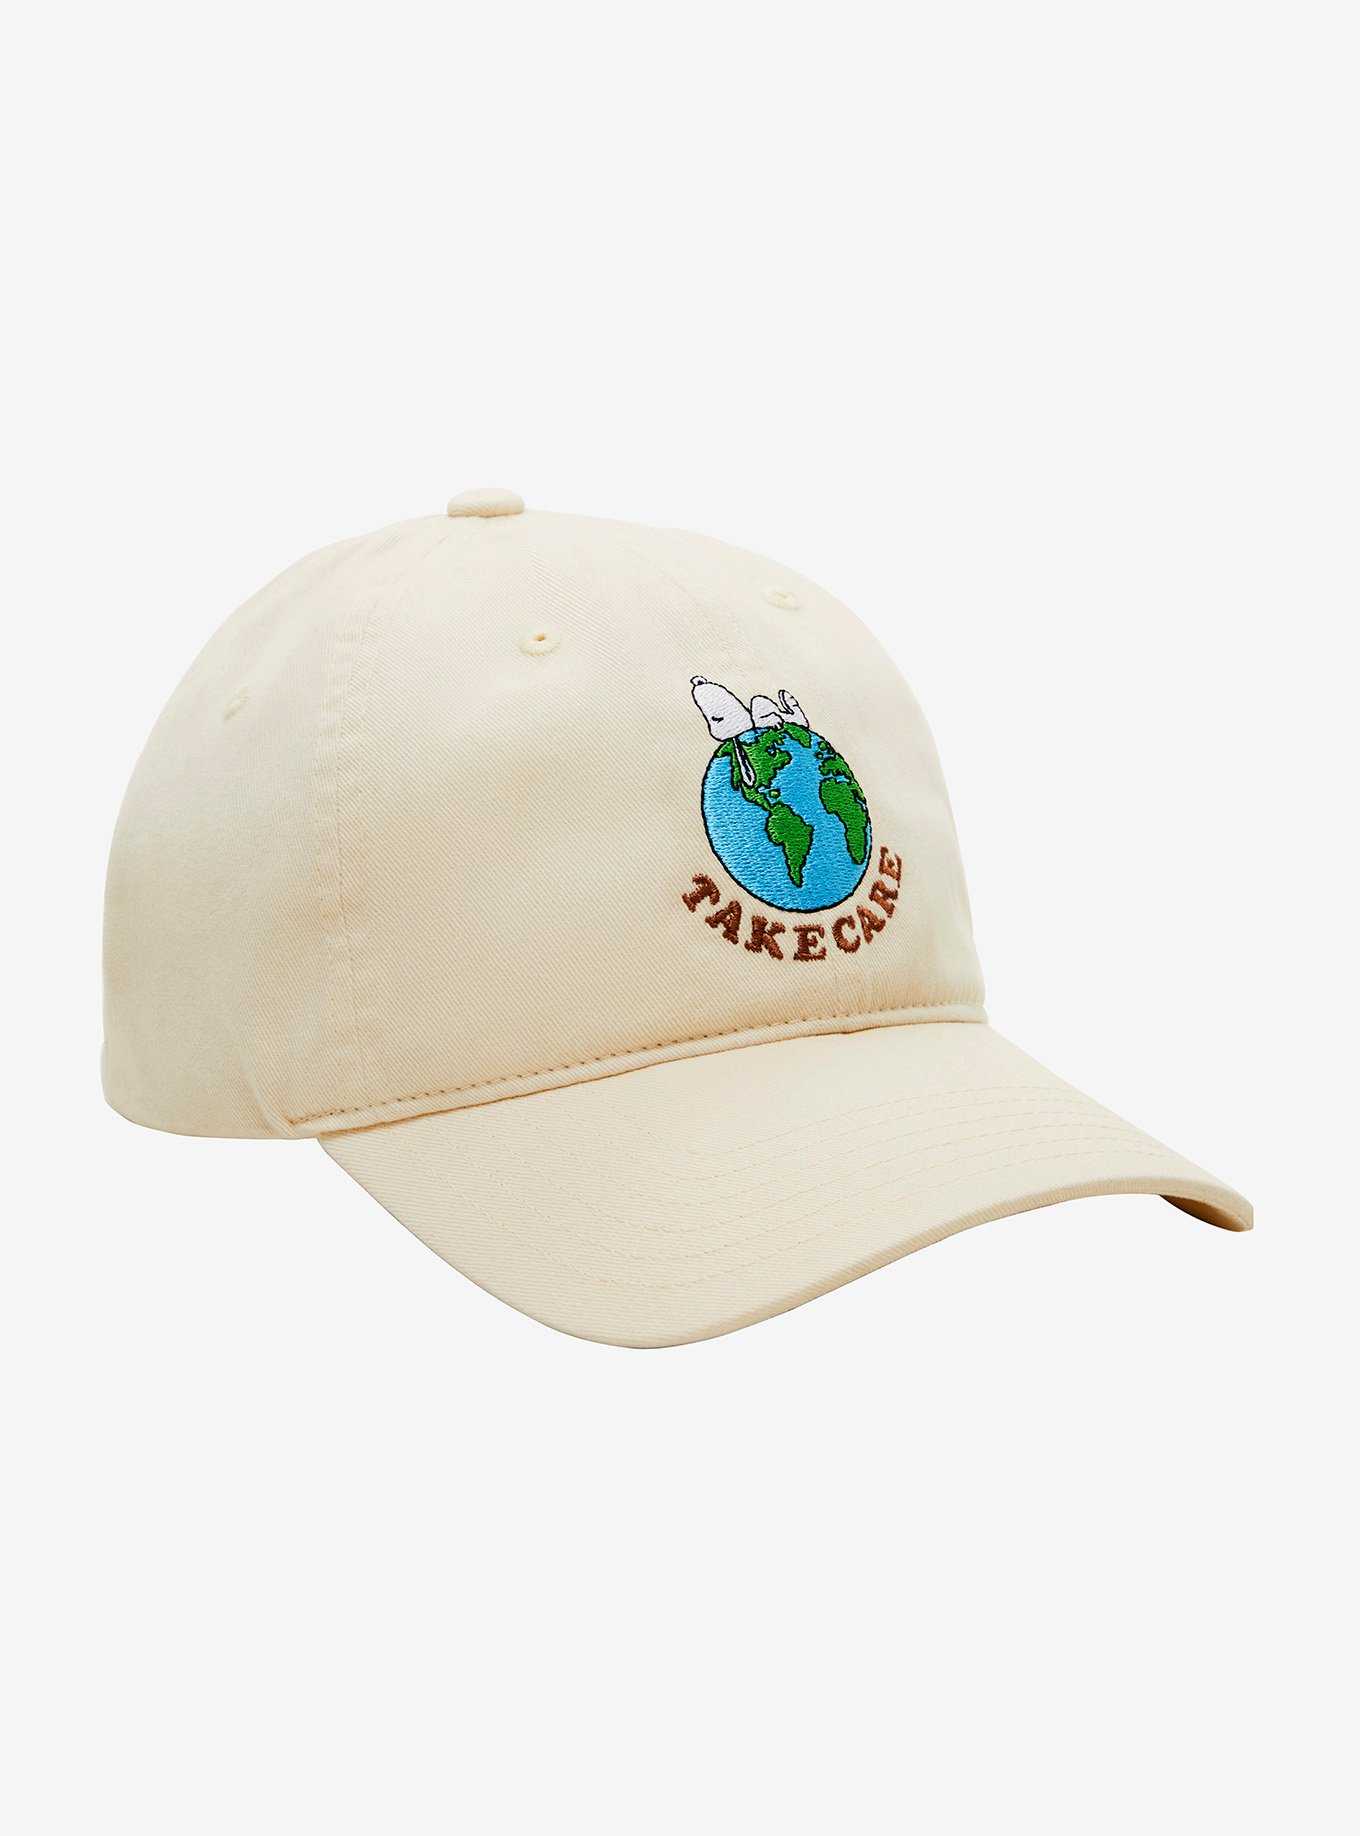 Peanuts Snoopy Earth Take Care Cap - BoxLunch Exclusive, , hi-res